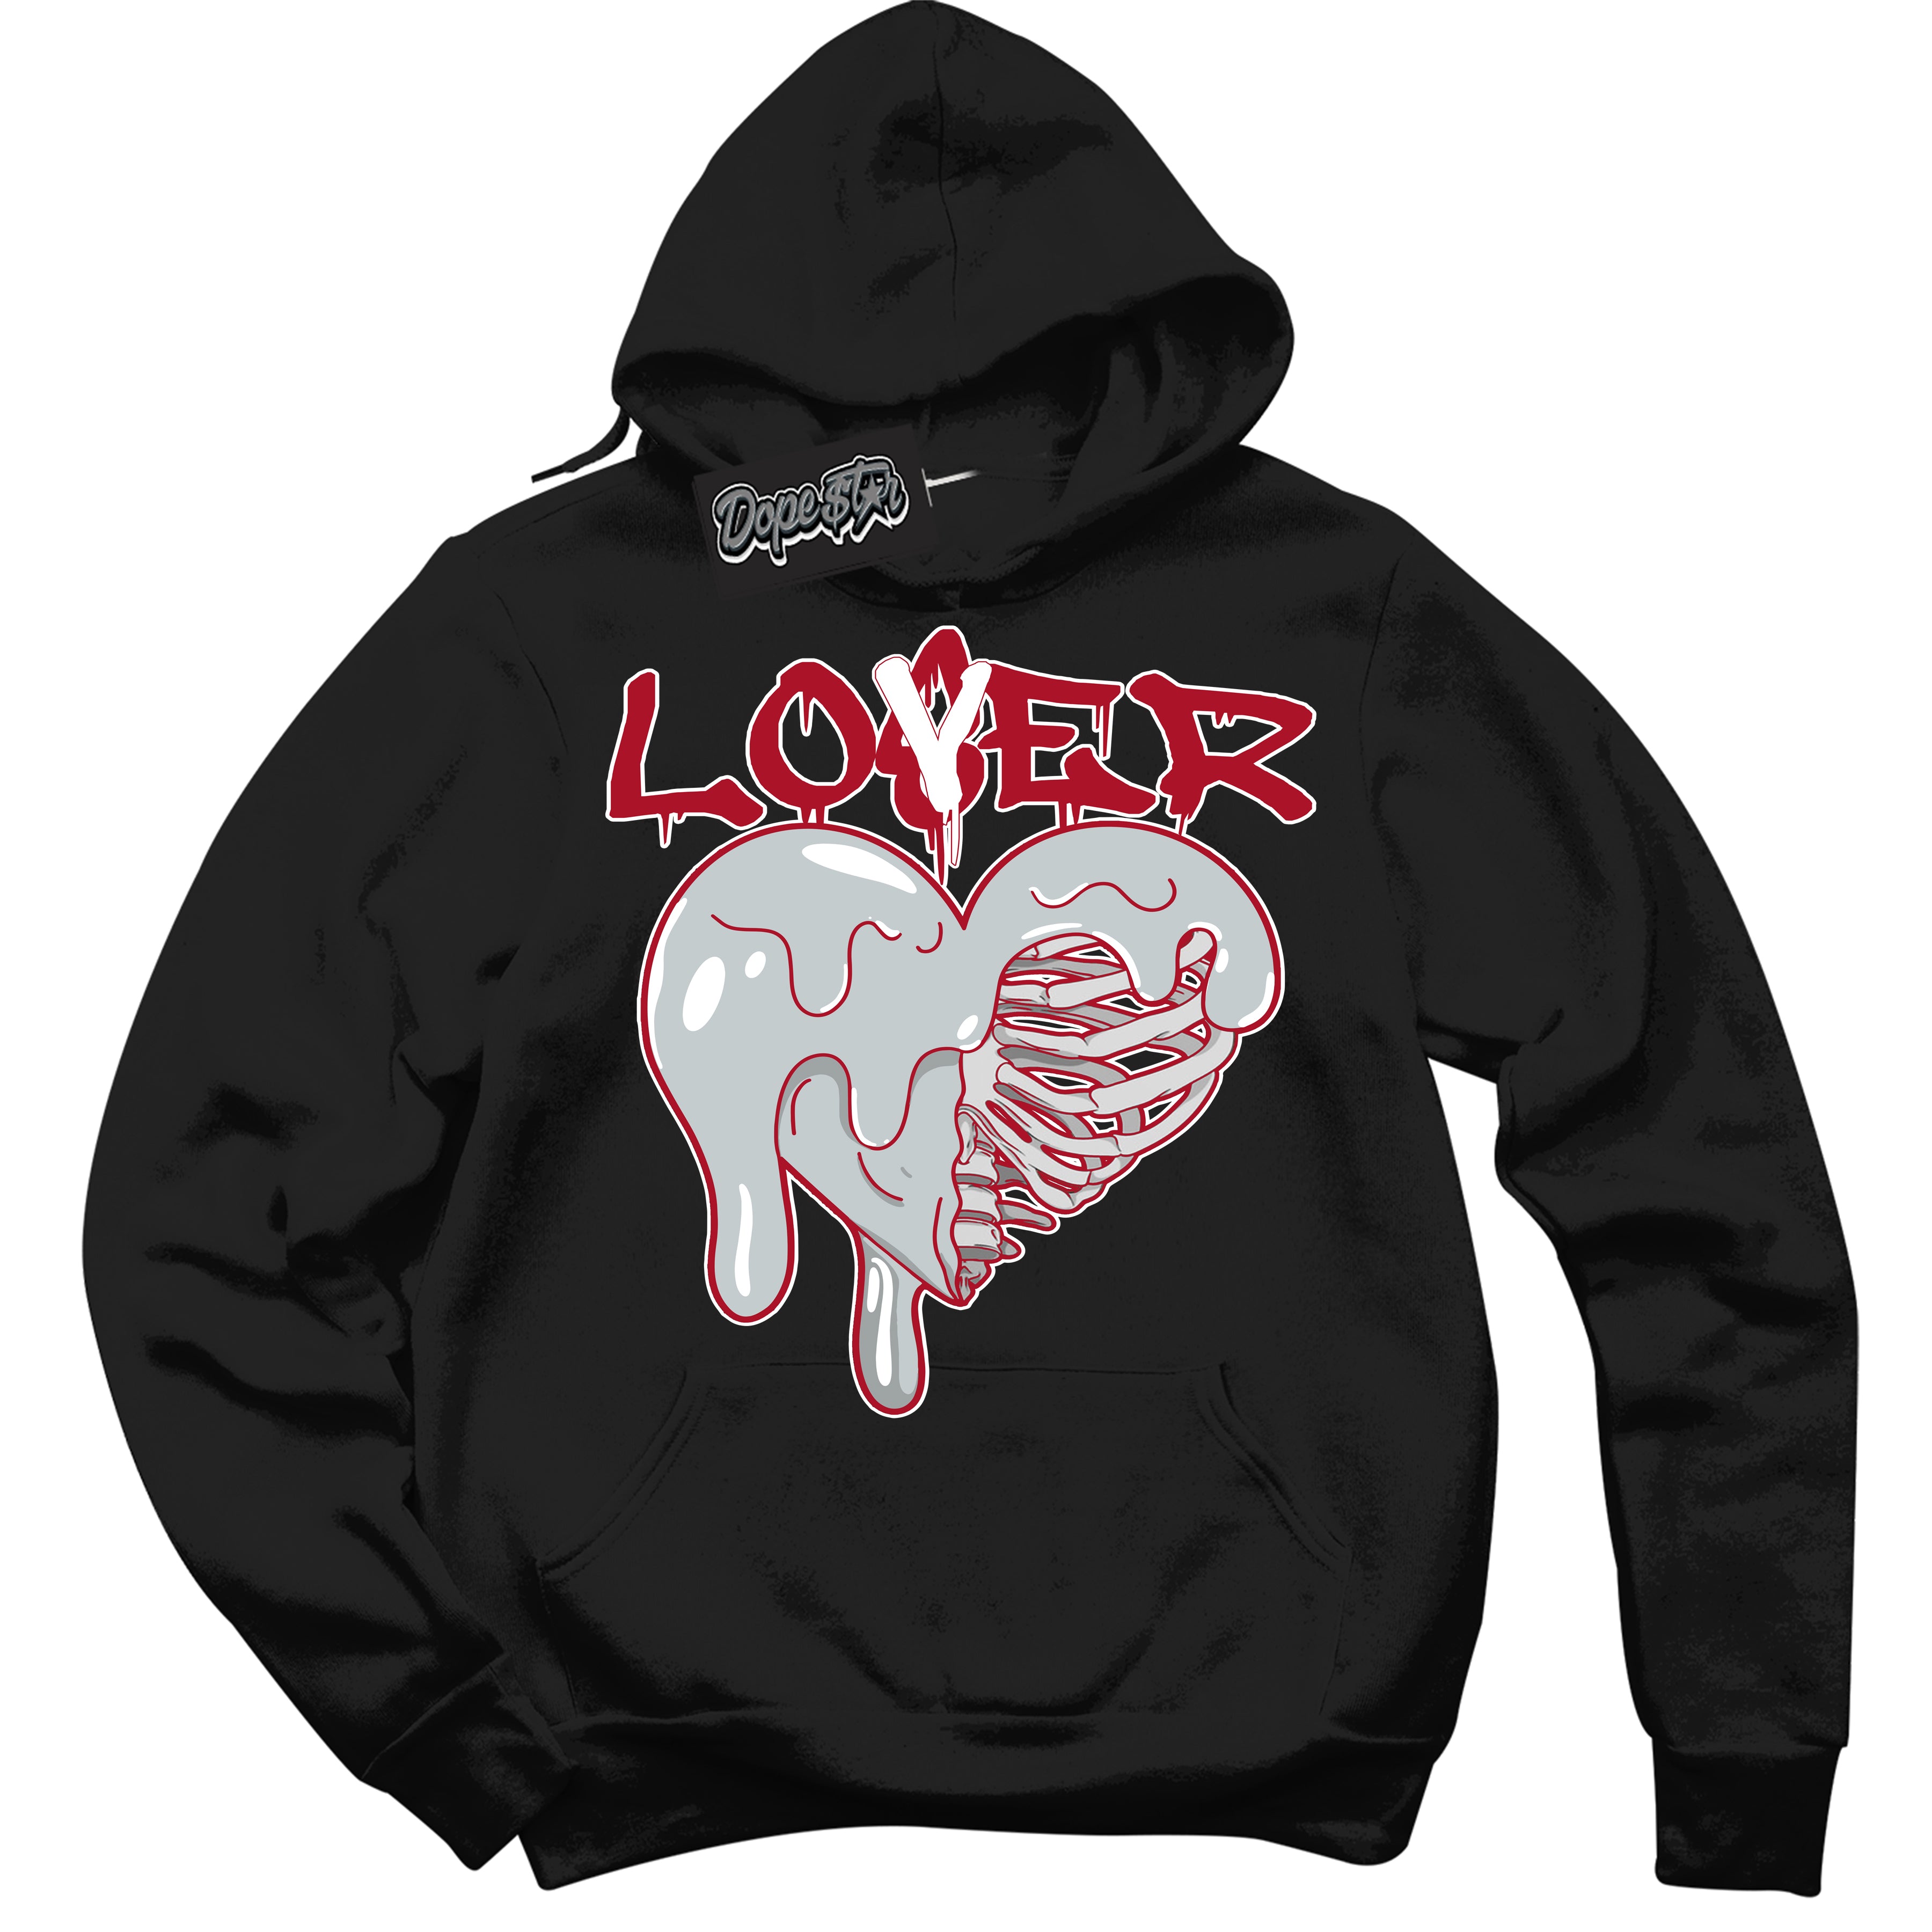 Cool Black Hoodie with “ Lover Loser ”  design that Perfectly Matches  Reverse Ultraman Sneakers.